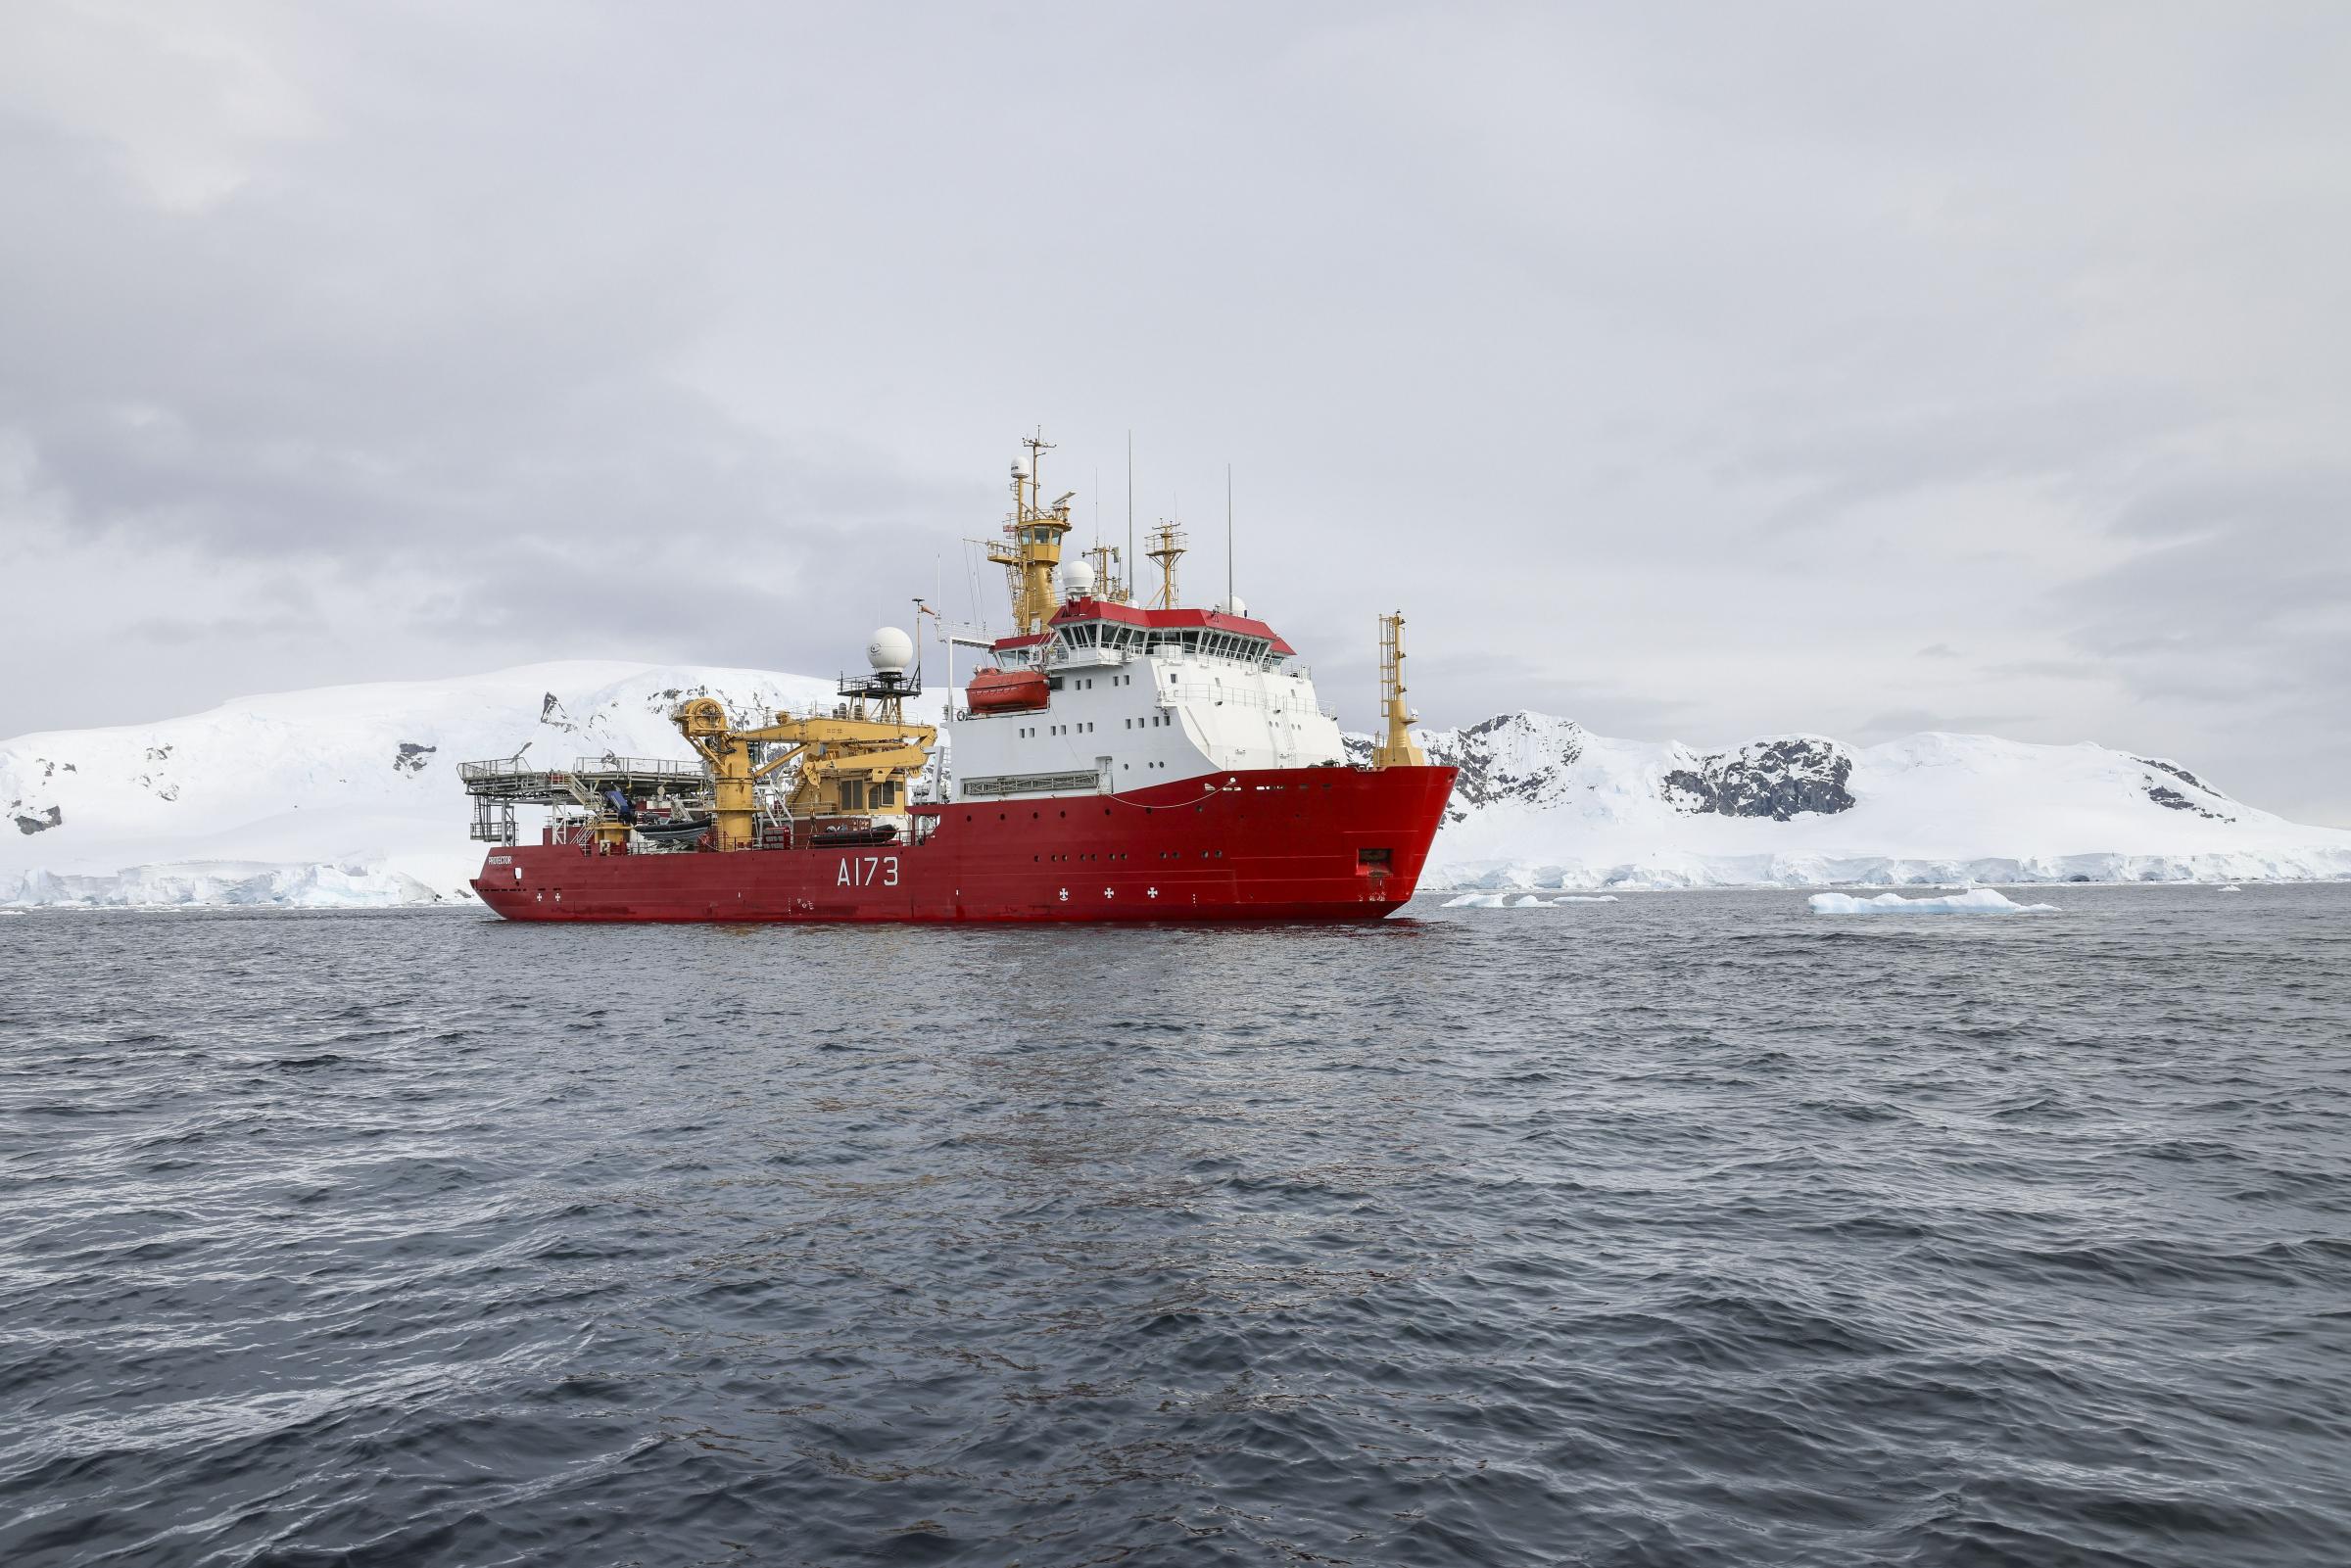 HMS Protector carries out survey work around the Antarctic Peninsula. Pic - Royal Navy / Crown copyright 